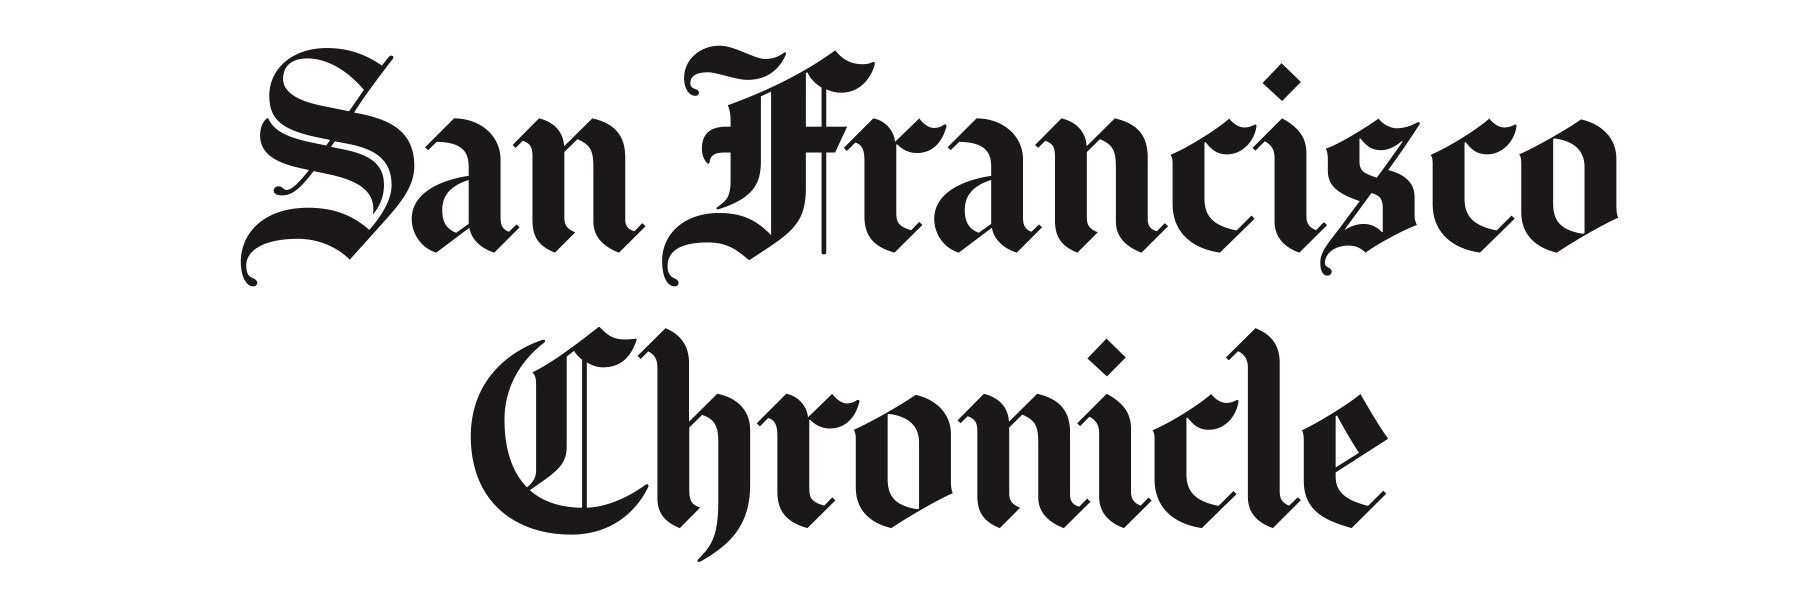 sfchronicle-stacked.png